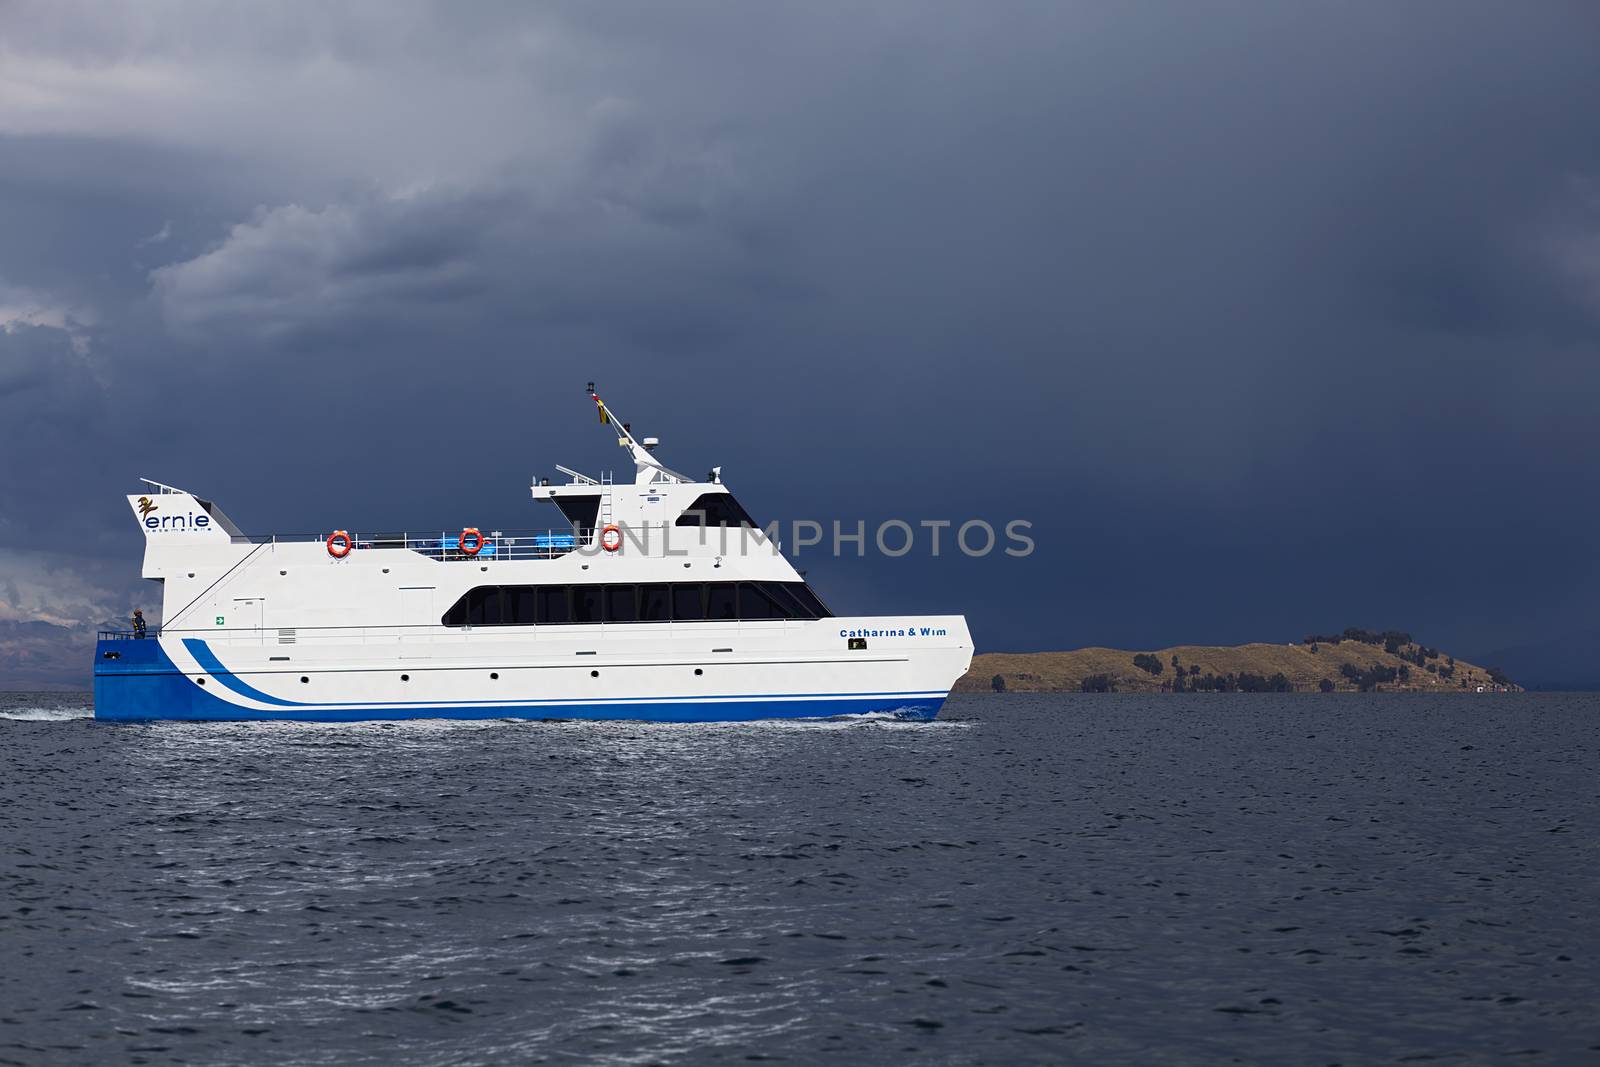 LAKE TITICACA, BOLIVIA - NOVEMBER 5, 2014: Big passenger ferry on Lake Titicaca close to the shore of the popular travel destination of Isla del Sol (Island of the Sun) on November 5, 2014 on Lake Titicaca, Bolivia. In the back is visible with thunderclouds above it. 